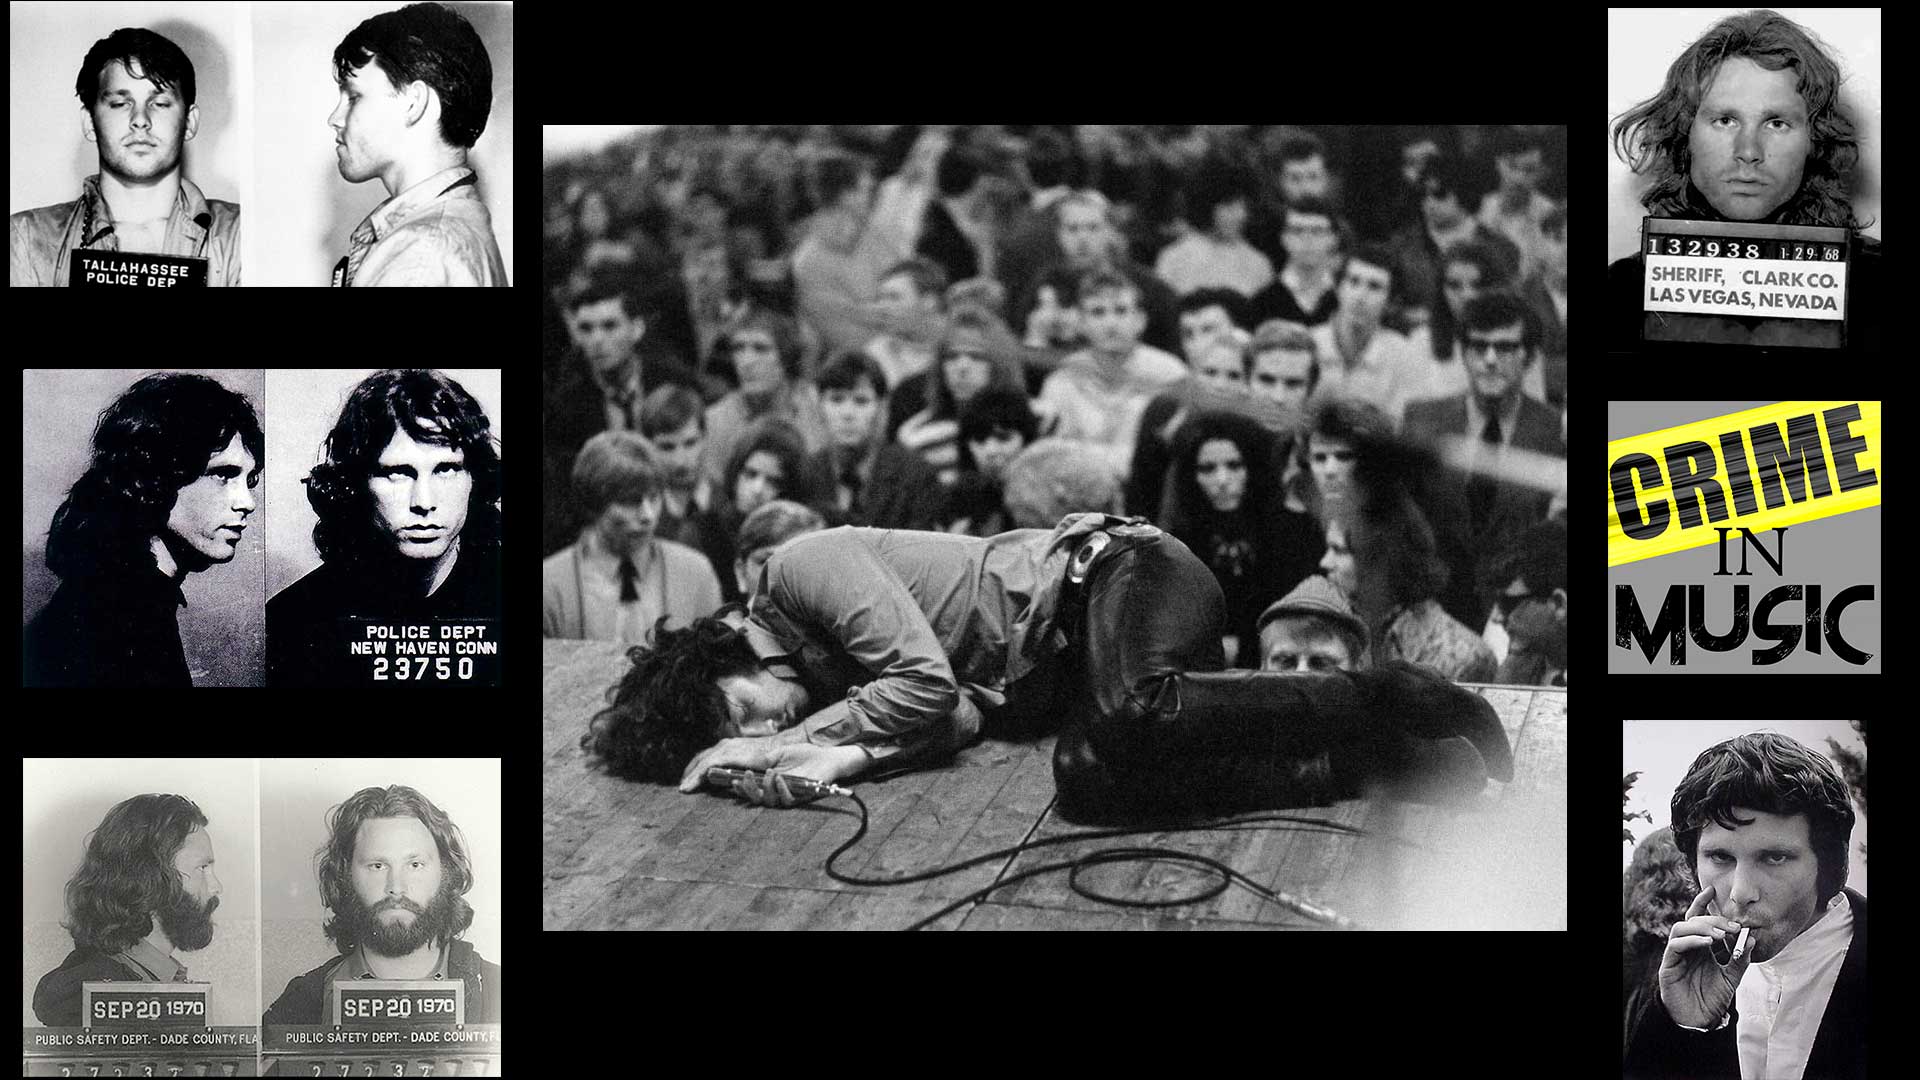 photo collage of Jim Morrison, Musician, poet, the Lizard King